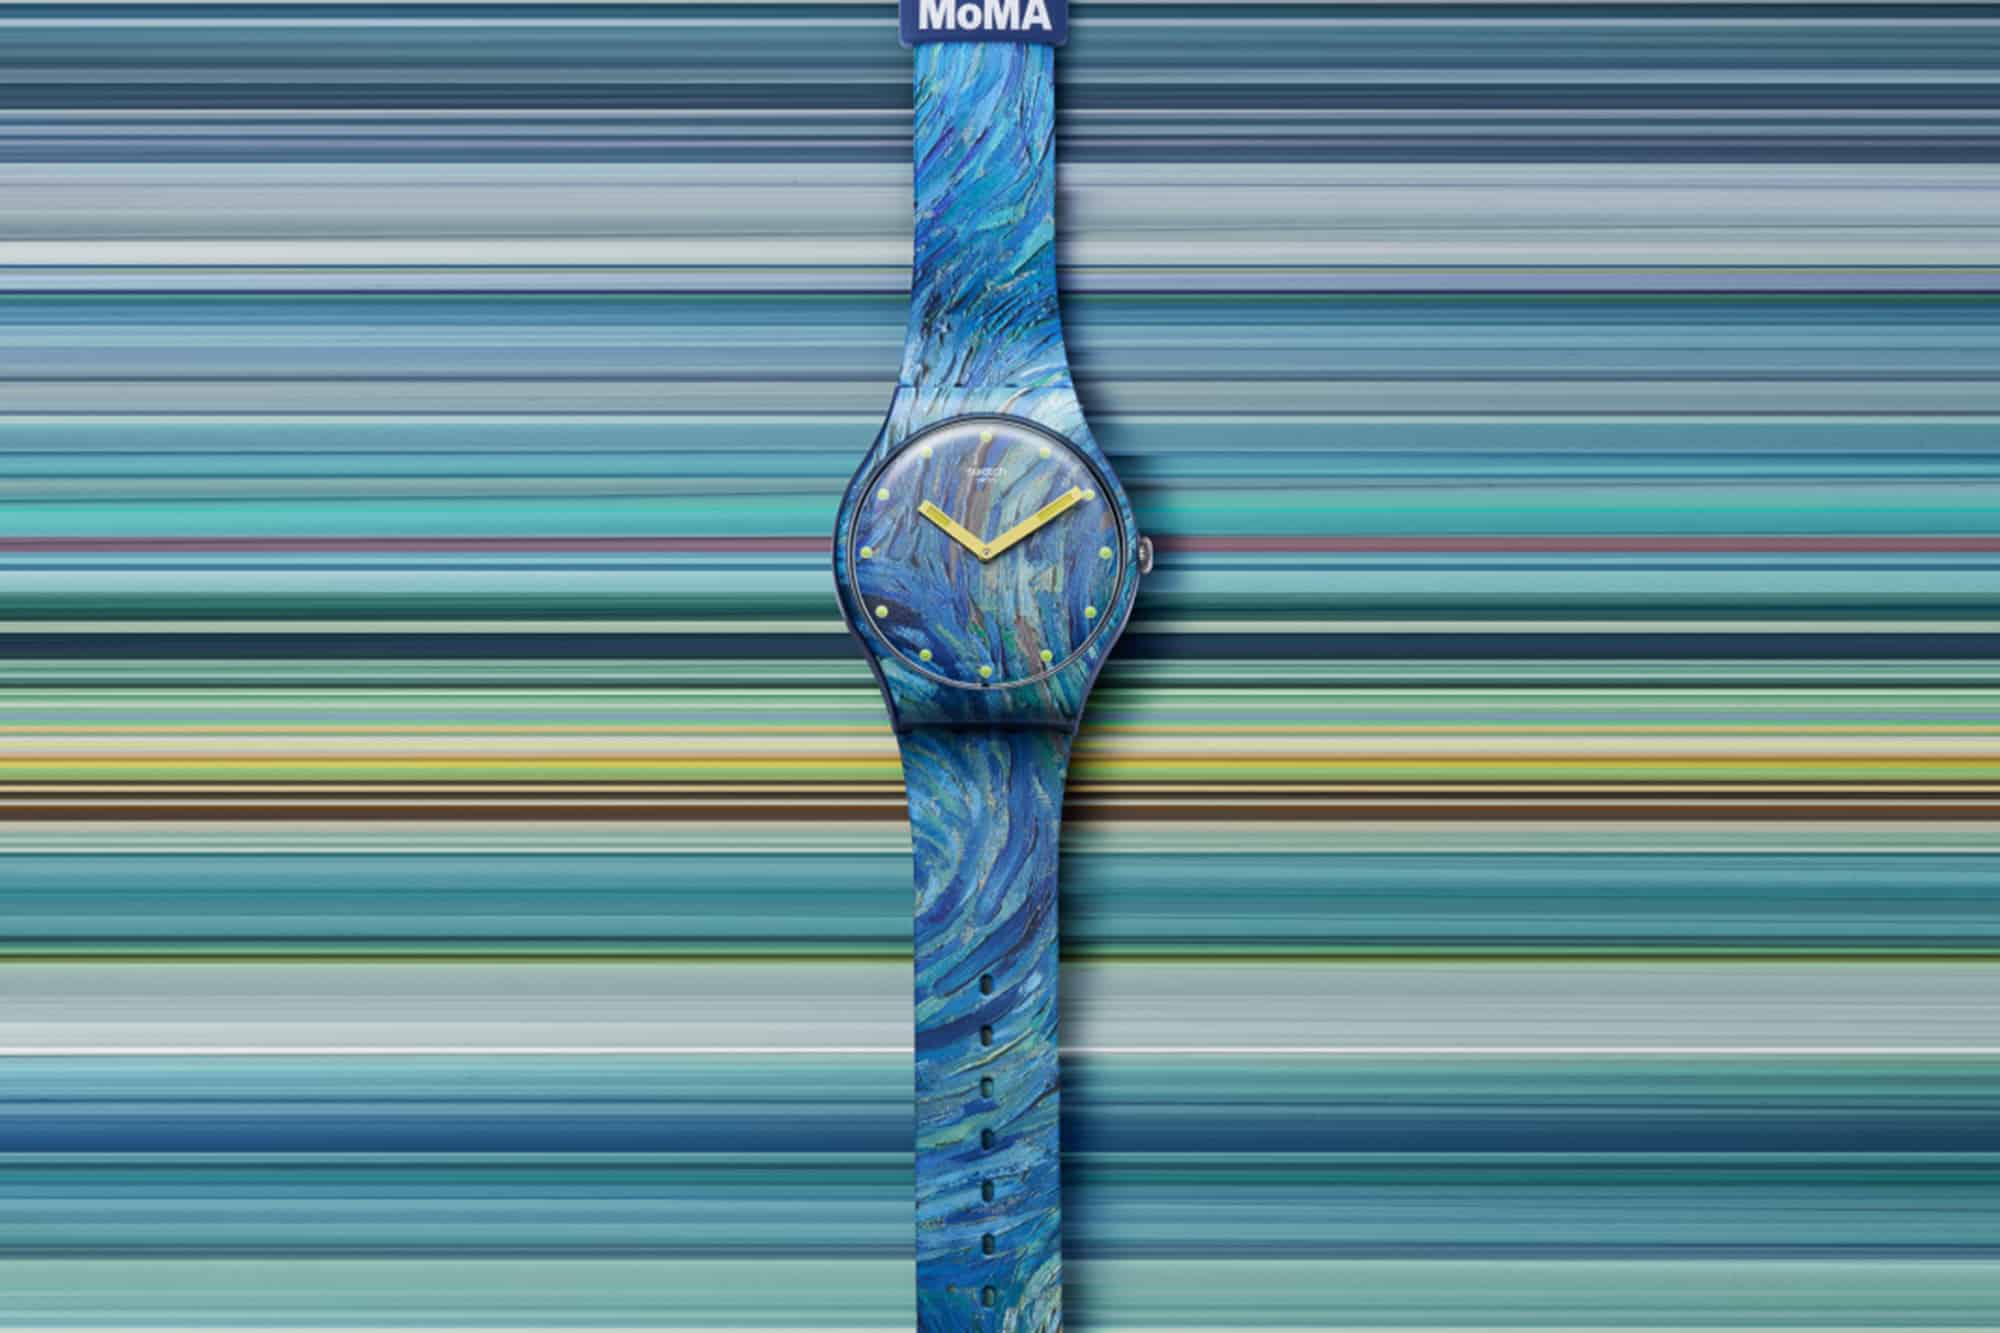 Swatch Partners with MoMA on a New Collection Inspired by Great